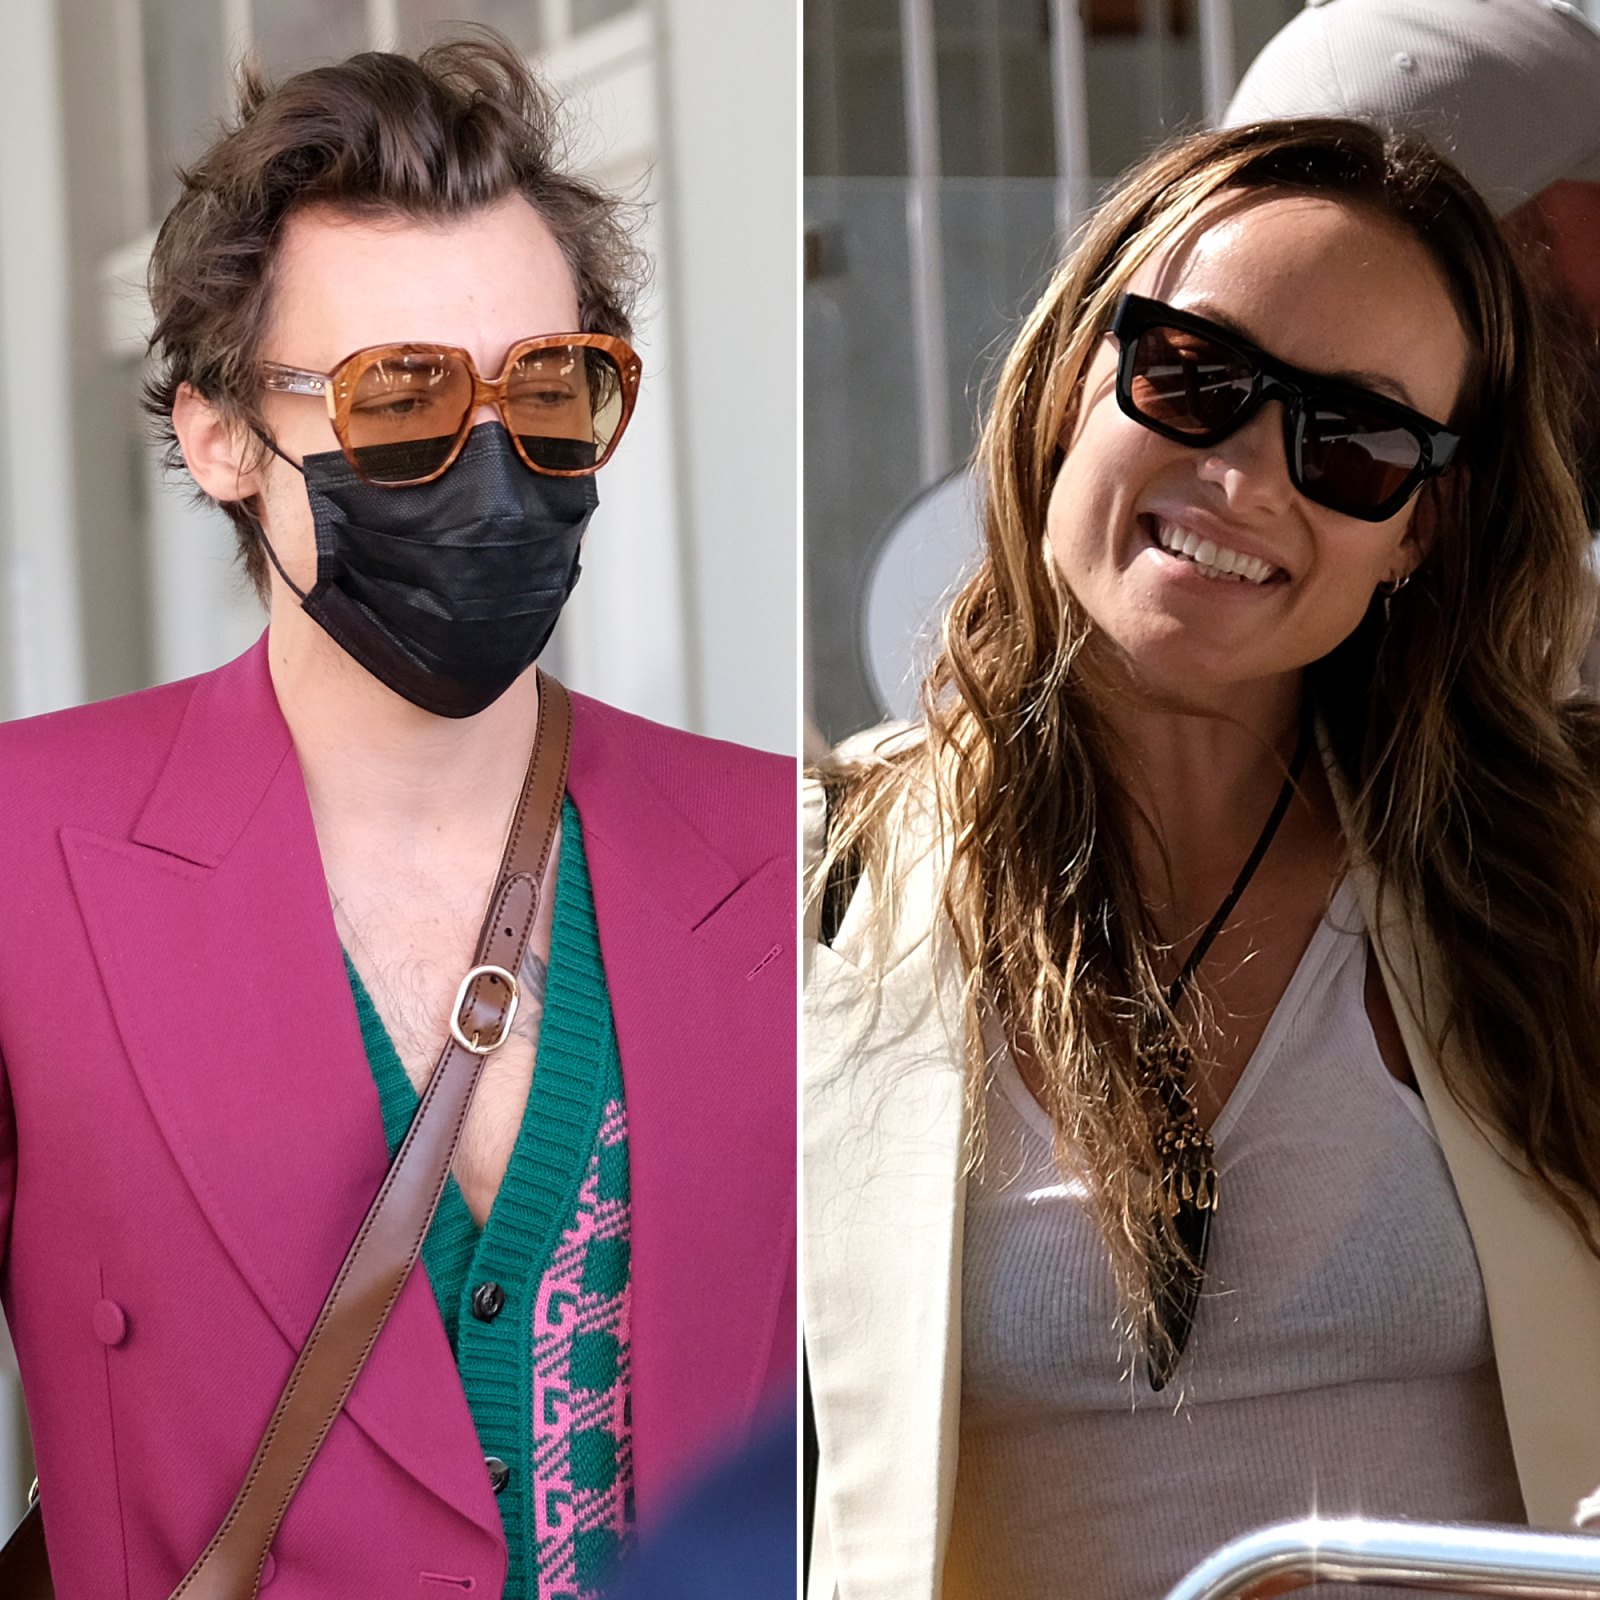 Harry Styles and Olivia Wilde Arrive in Venice Ahead of 'Don't Worry Darling' World Premiere: Photos